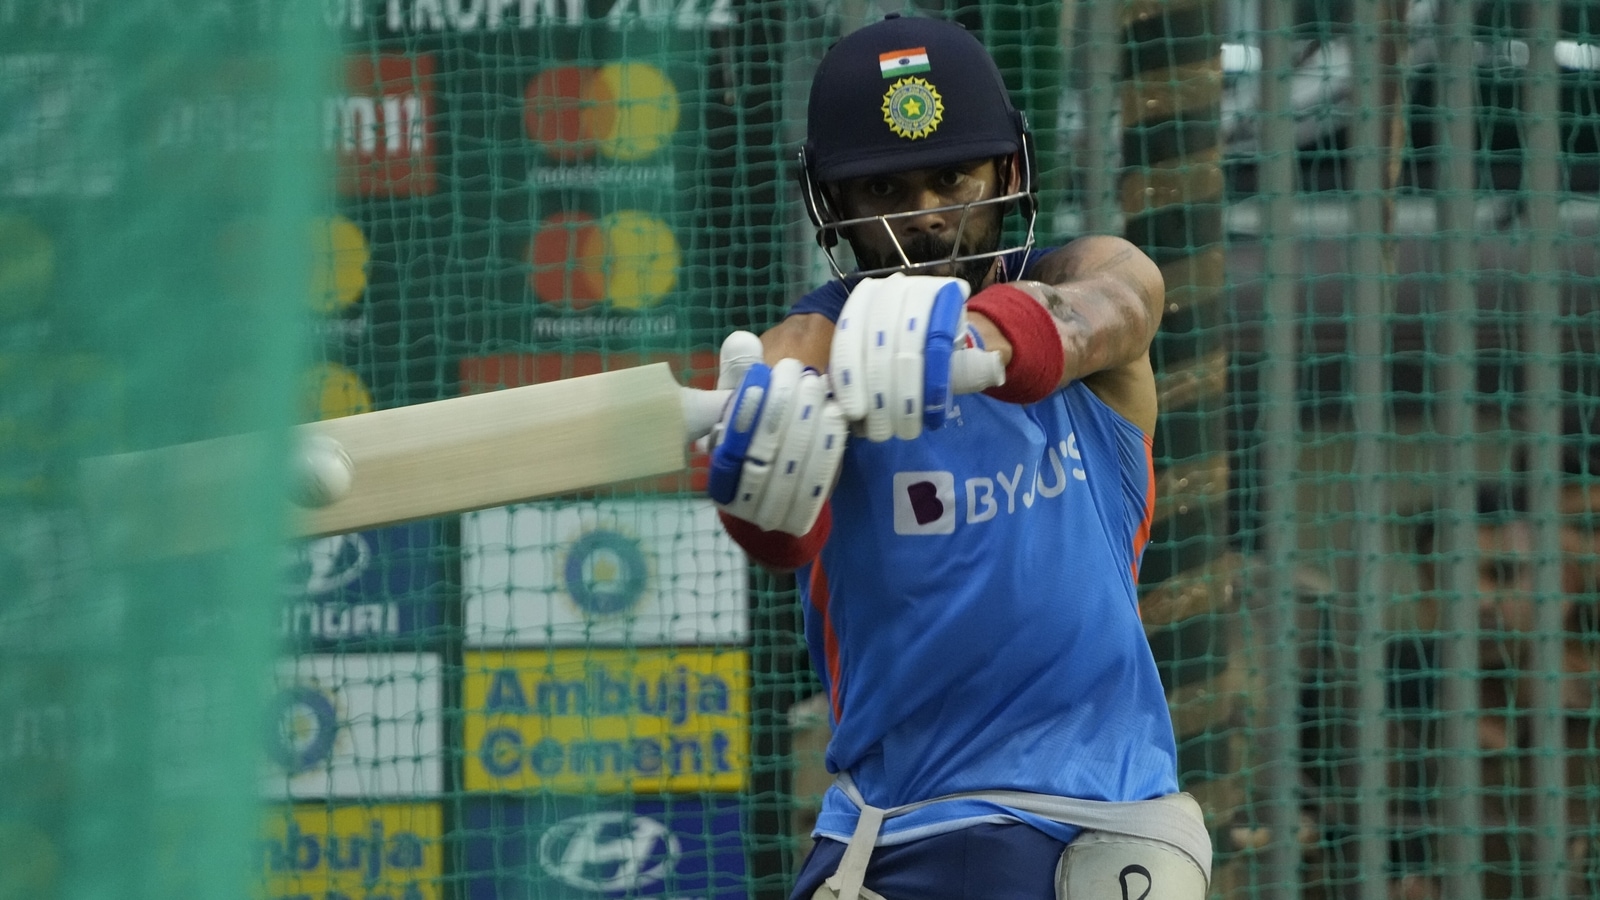 watch-jab-hooda-aa-jayega-virat-kohli-reacts-after-india-staff-says-your-time-is-up-at-nets